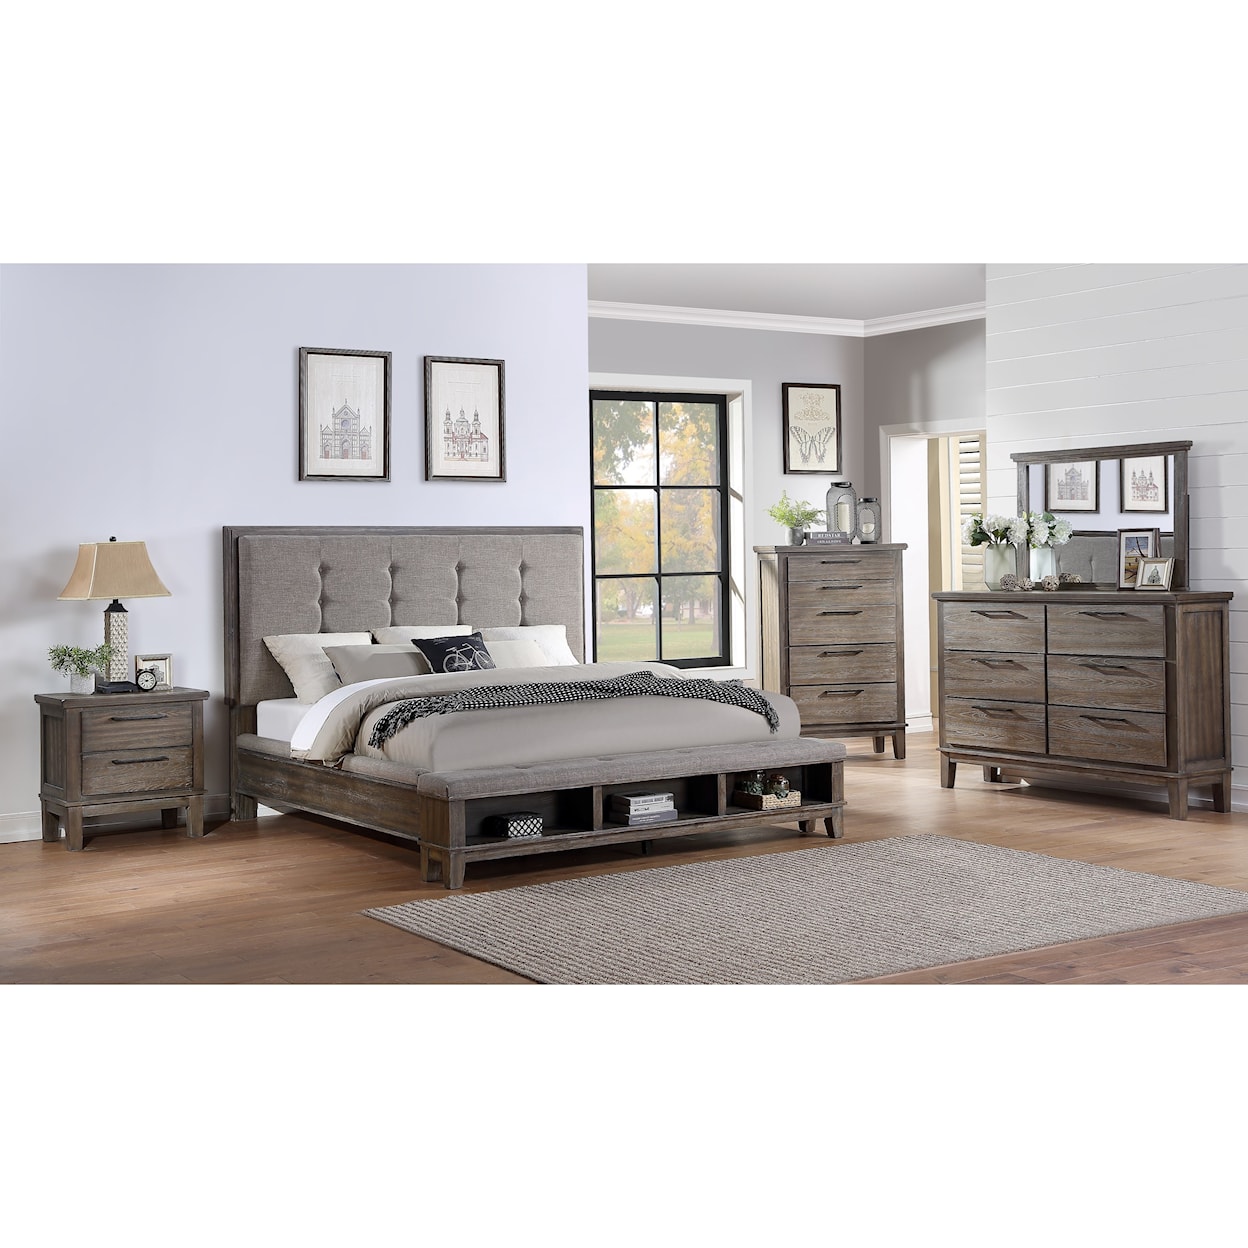 New Classic Furniture Cagney California King Bedroom Group